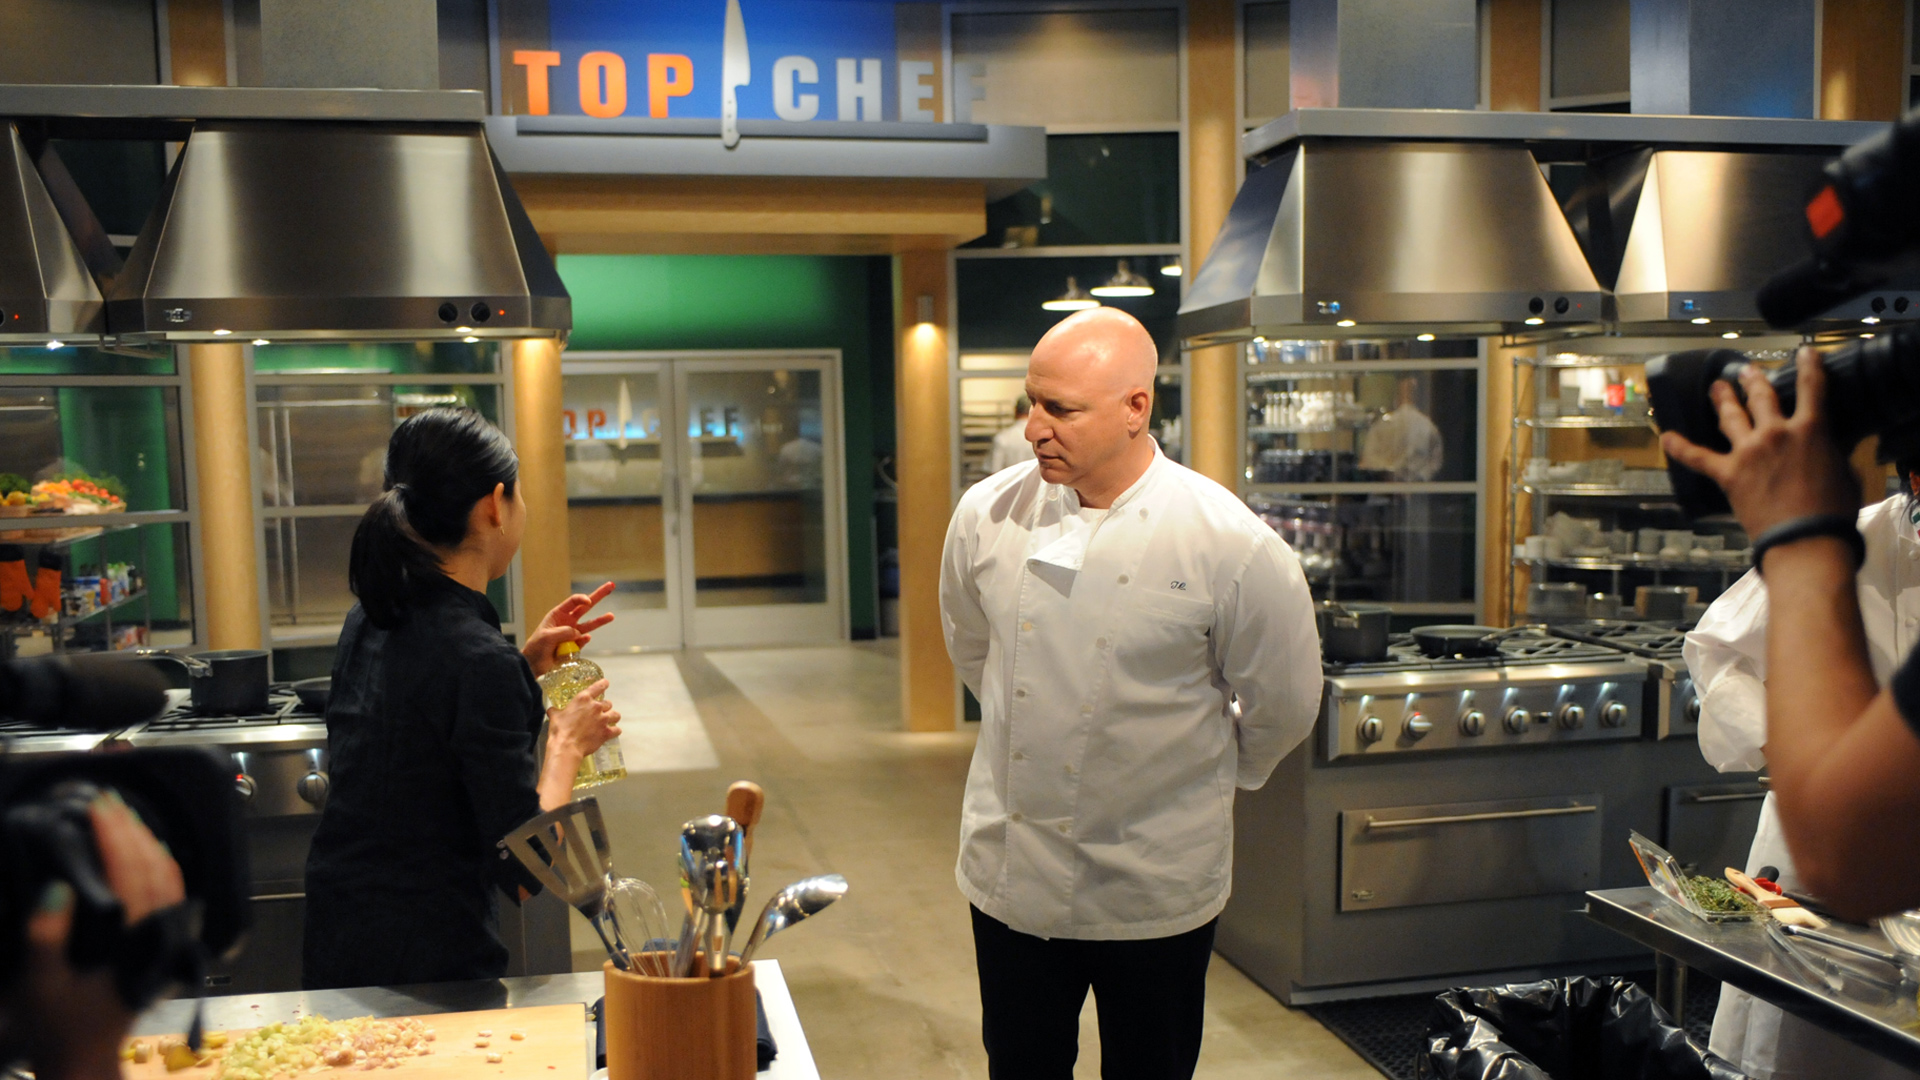 Top Chef Last Chance Kitchen (TV Series 2011 Now)